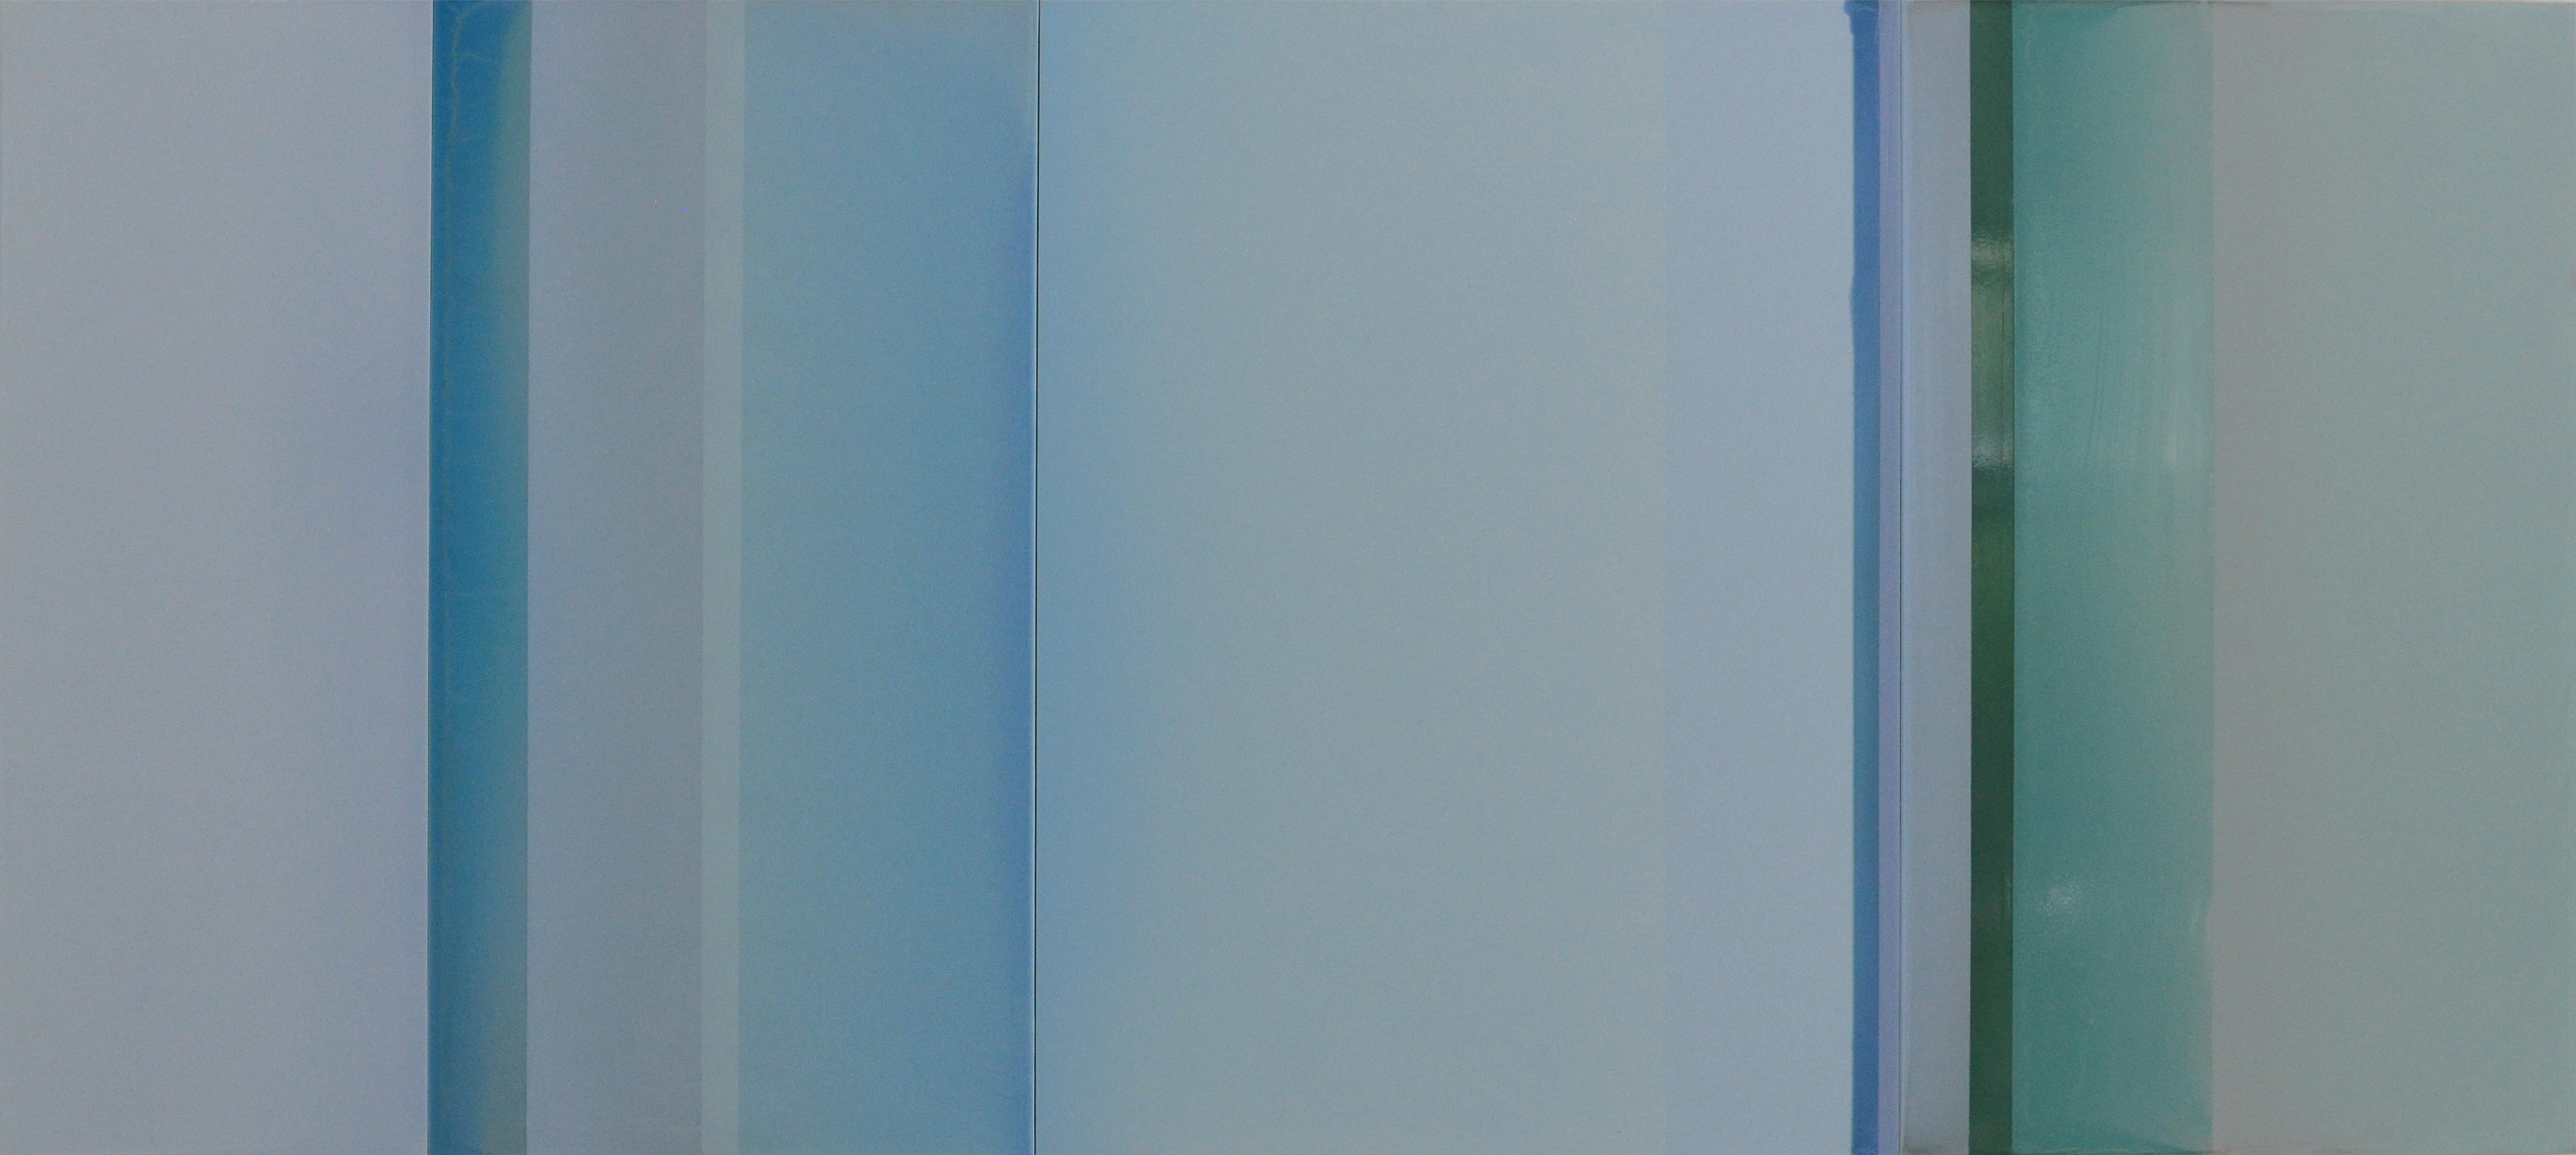 Susan English
Shades of Ocean, 2019
tinted polymer on aluminum panel
36 x 80 in.

This contemporary abstract painting is created through a process of pouring acrylic polymer on panel, which results in a sleek, shiny surface.  The painting is